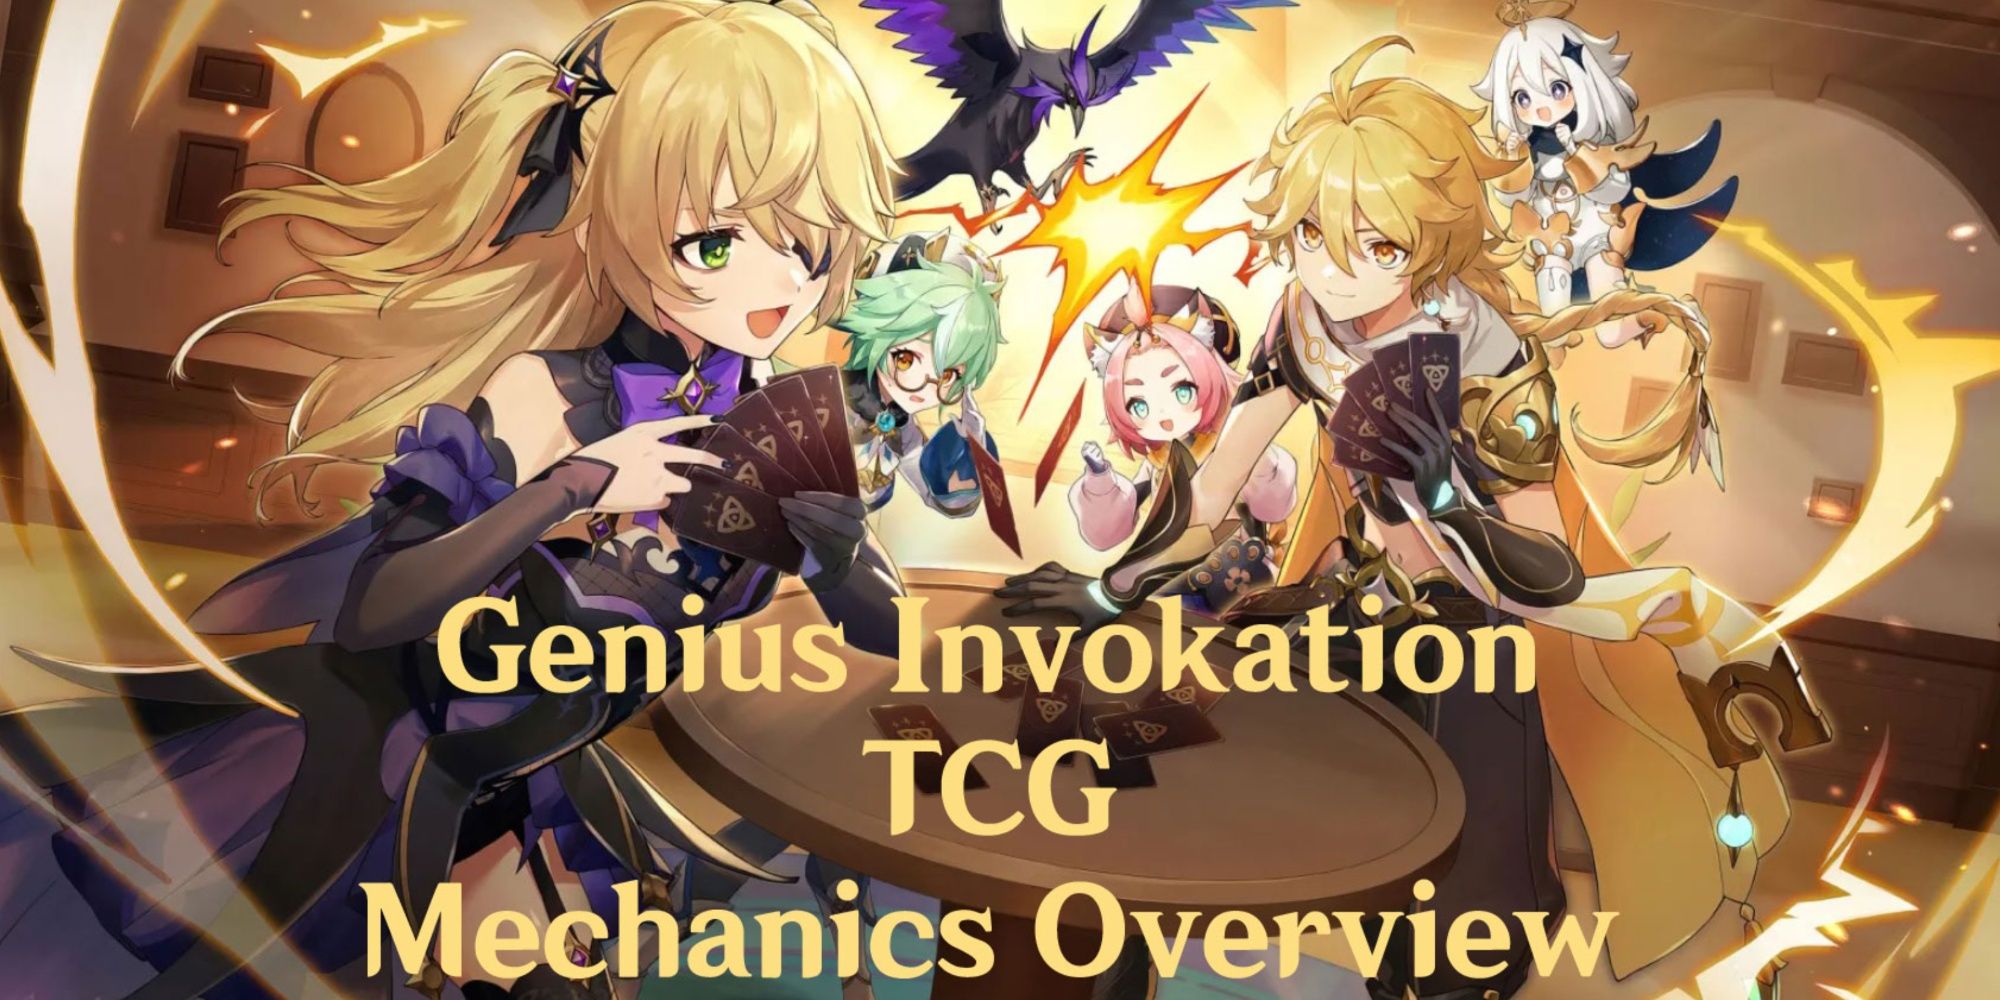 An Introduction to Genius Invokation TCG - New Genshin Impact Card Game